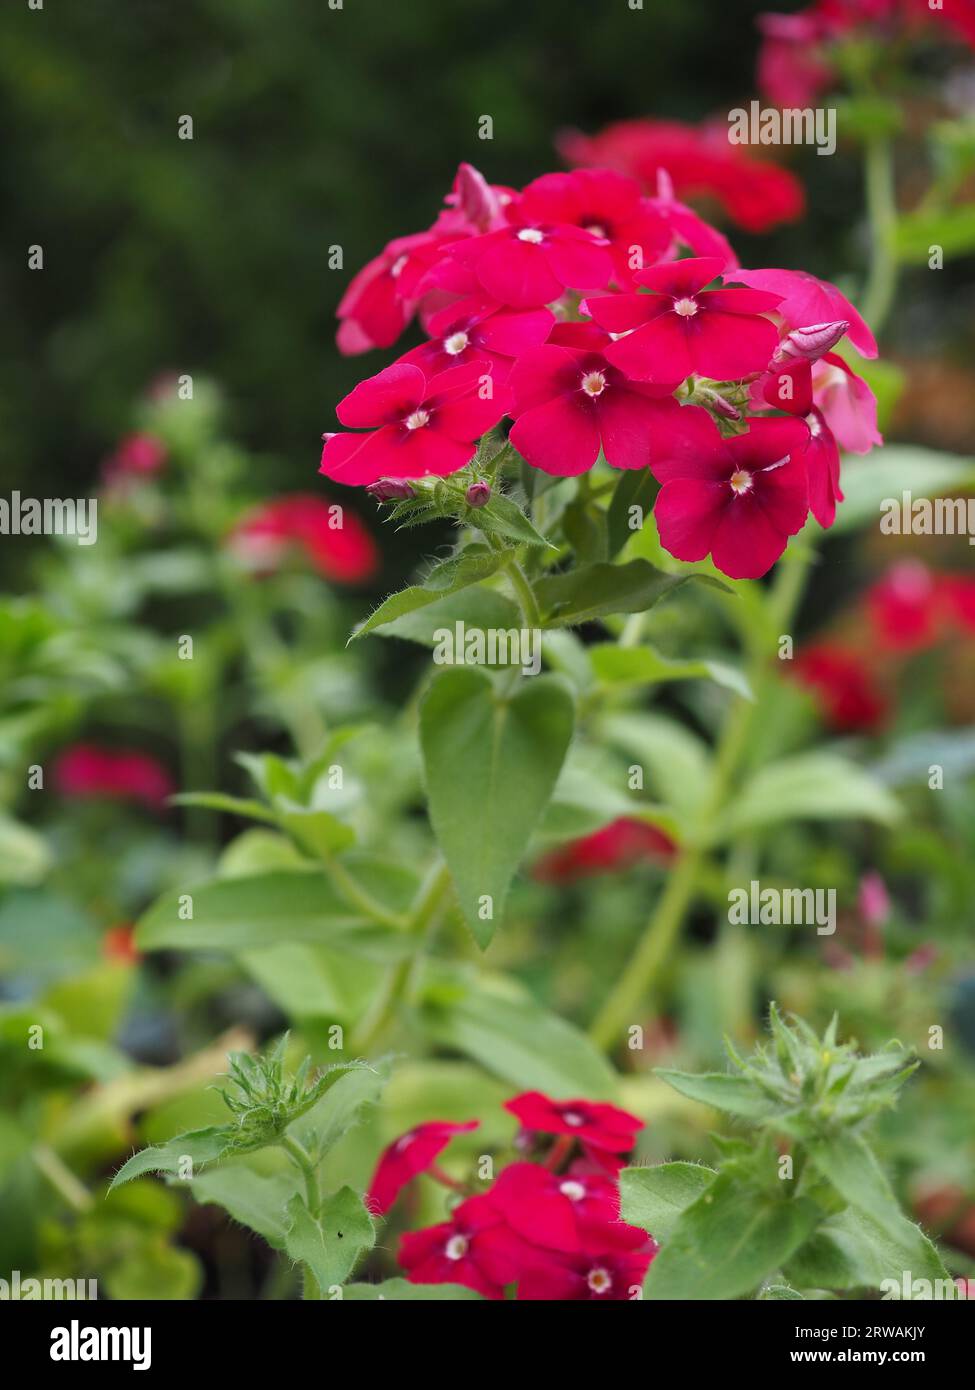 Stem of the Phlox drummondii grandiflora 'Coccinea' red annual phlox in flower and in profile in a cutting garden in Britain in summer Stock Photo